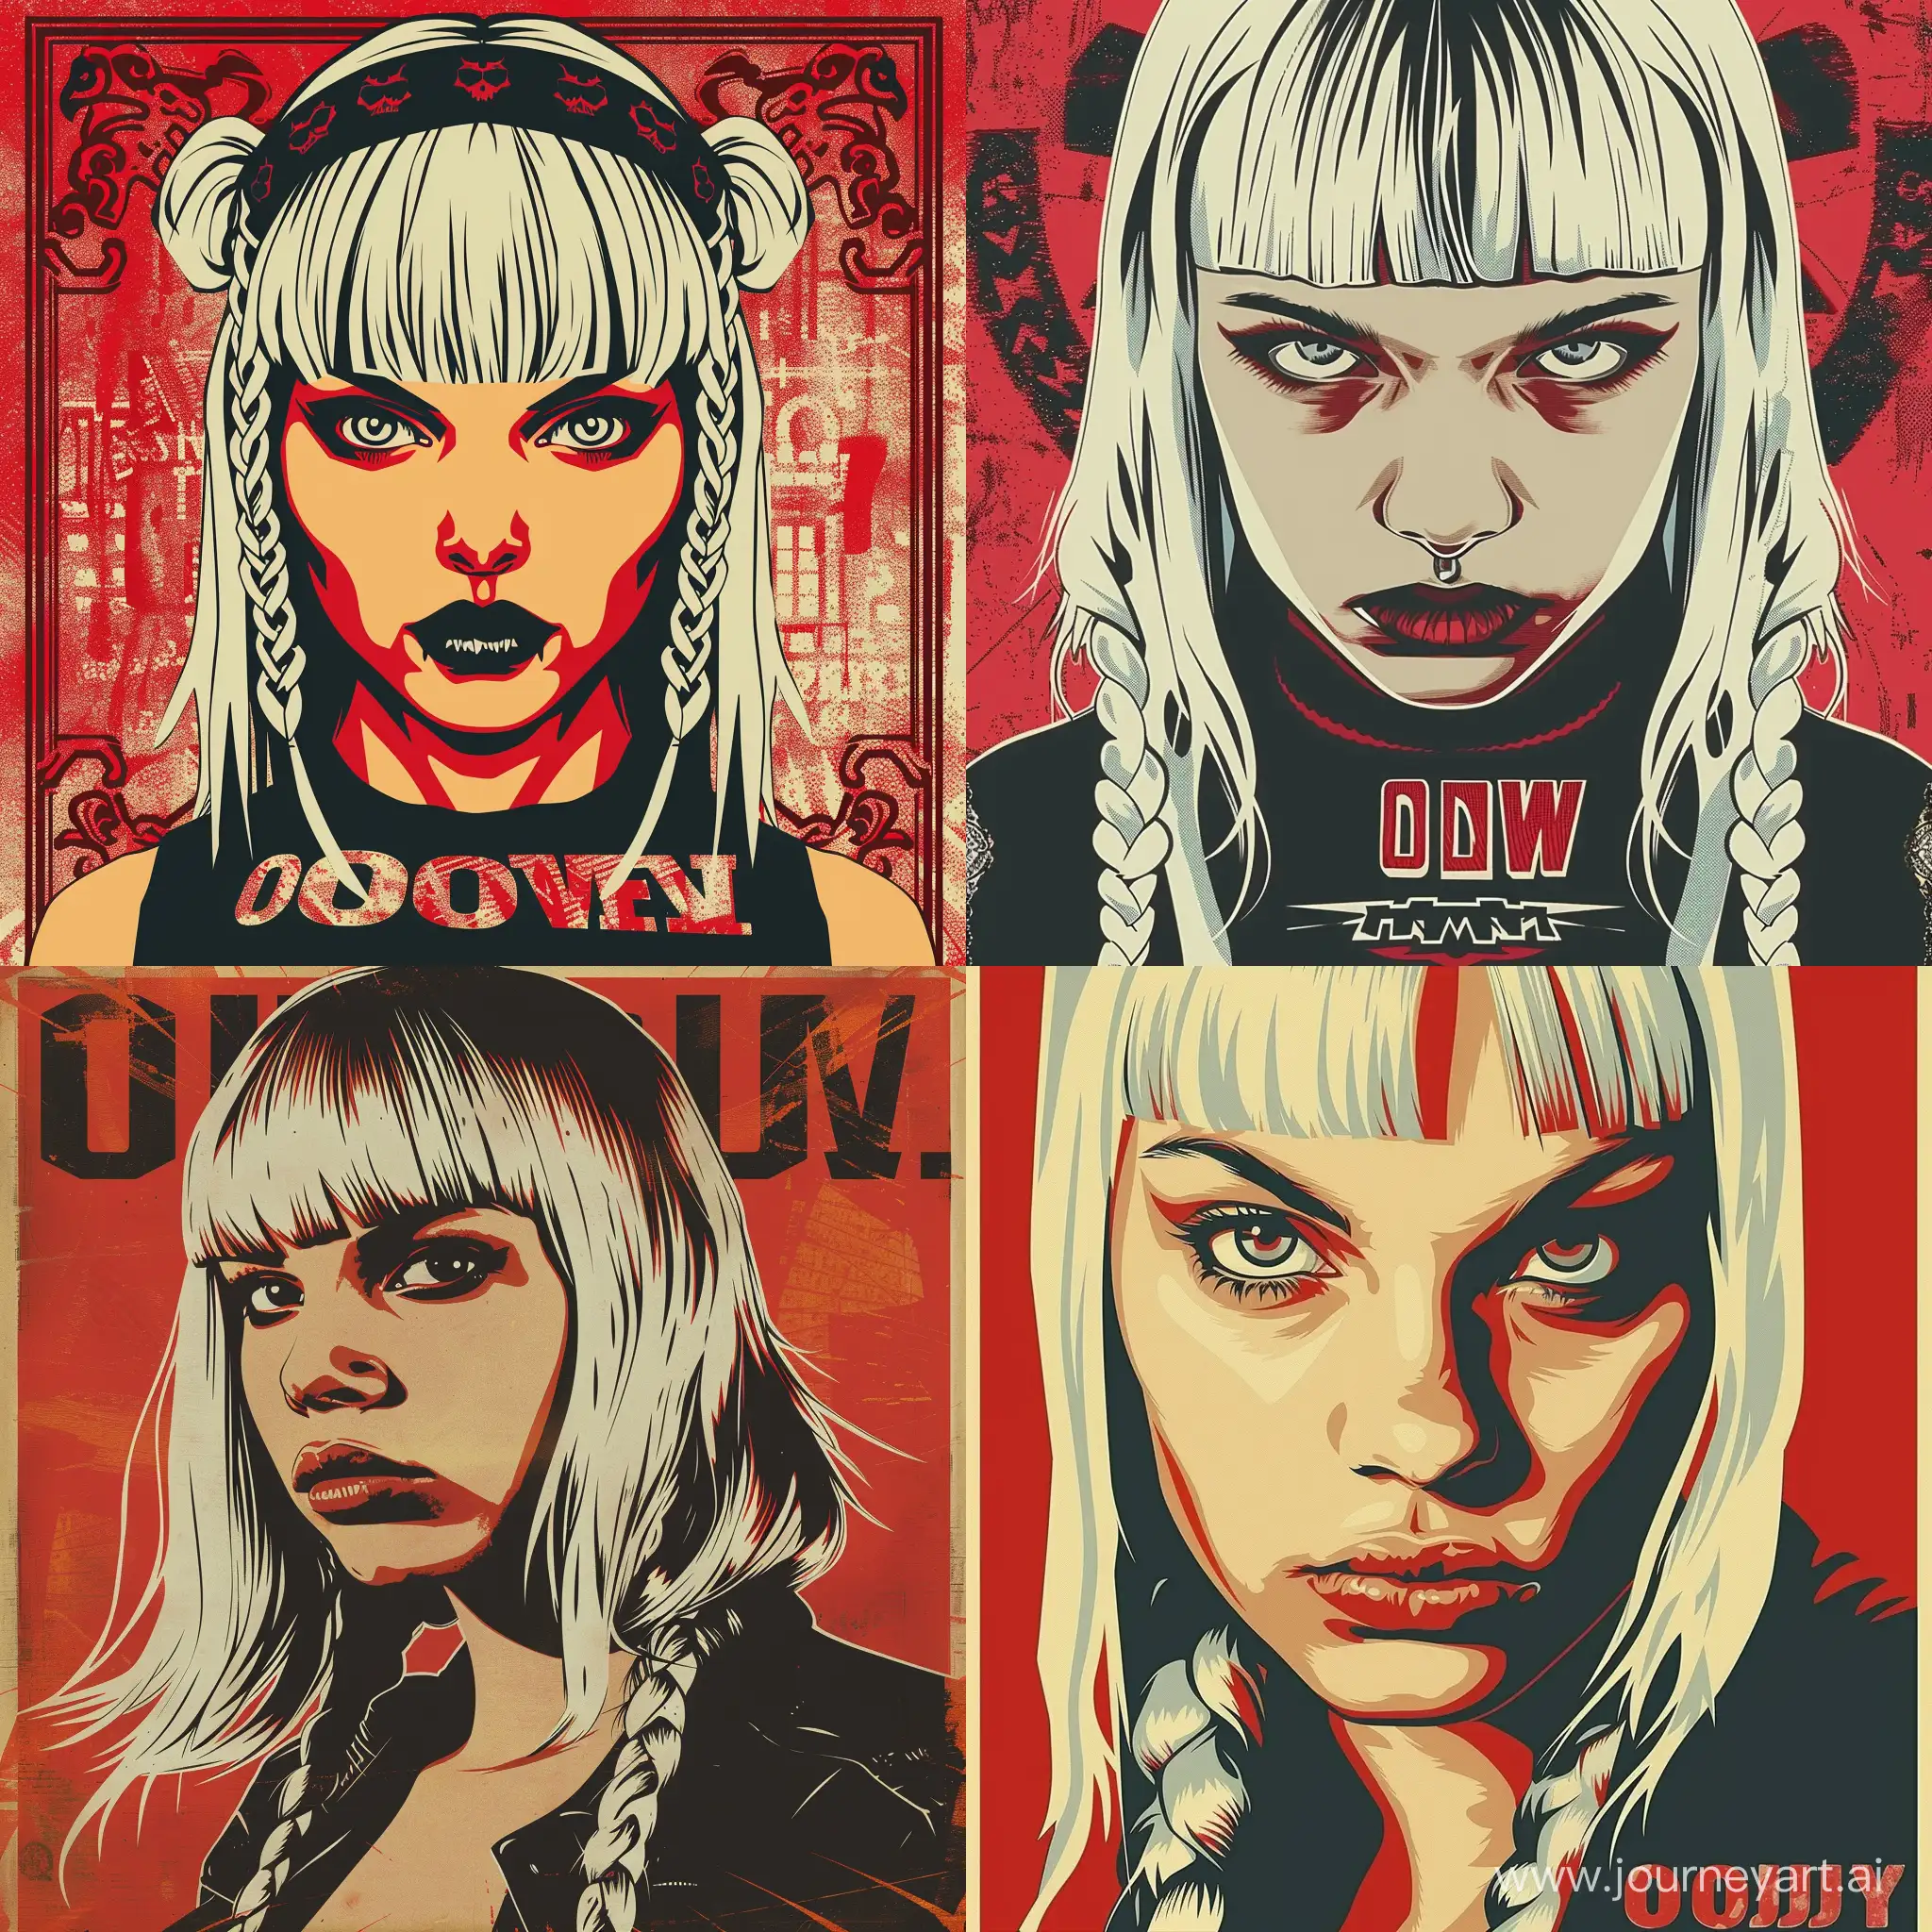 Punky-Style-Girl-with-White-Hair-Bangs-and-Braids-Standing-Near-Shepard-FaireyInspired-Poster